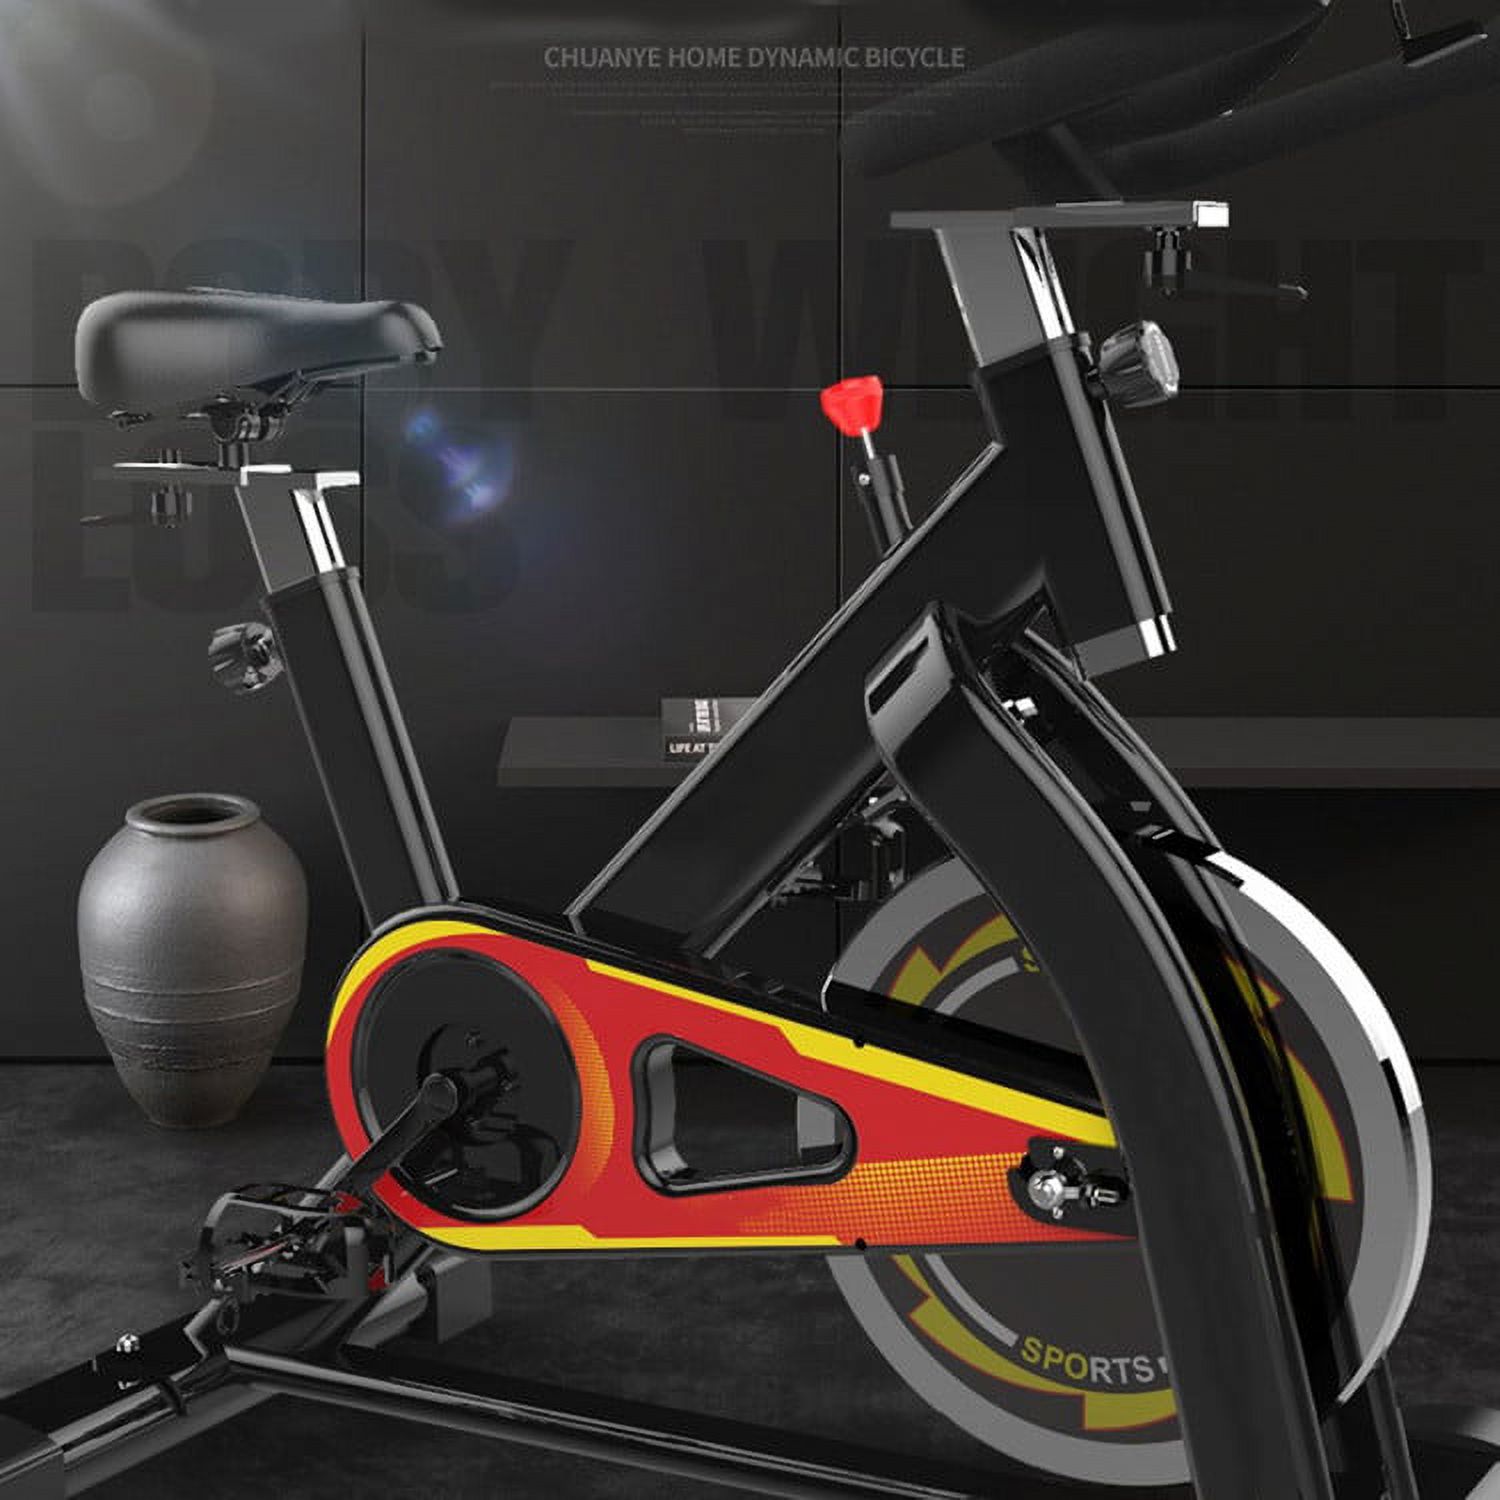 Stationary Exercise Bicycle Trainer Fitness Cardio Aerobic Exercise Bicycle Trainer S500(Black) - image 3 of 6